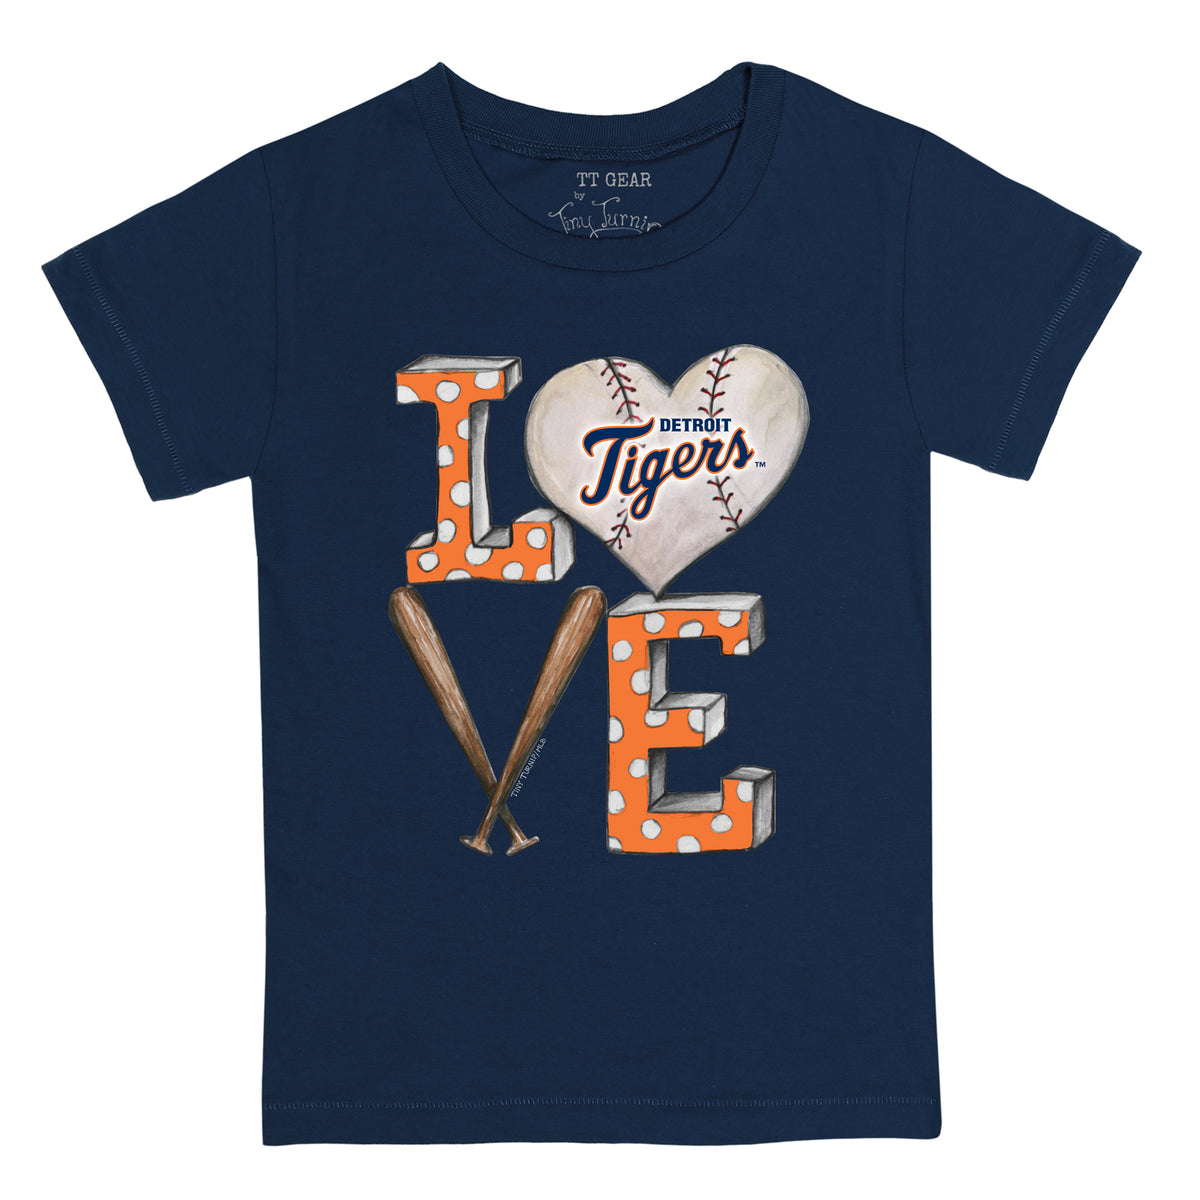 Detroit Tigers Youth T Shirt Size Large Blue Tee American League